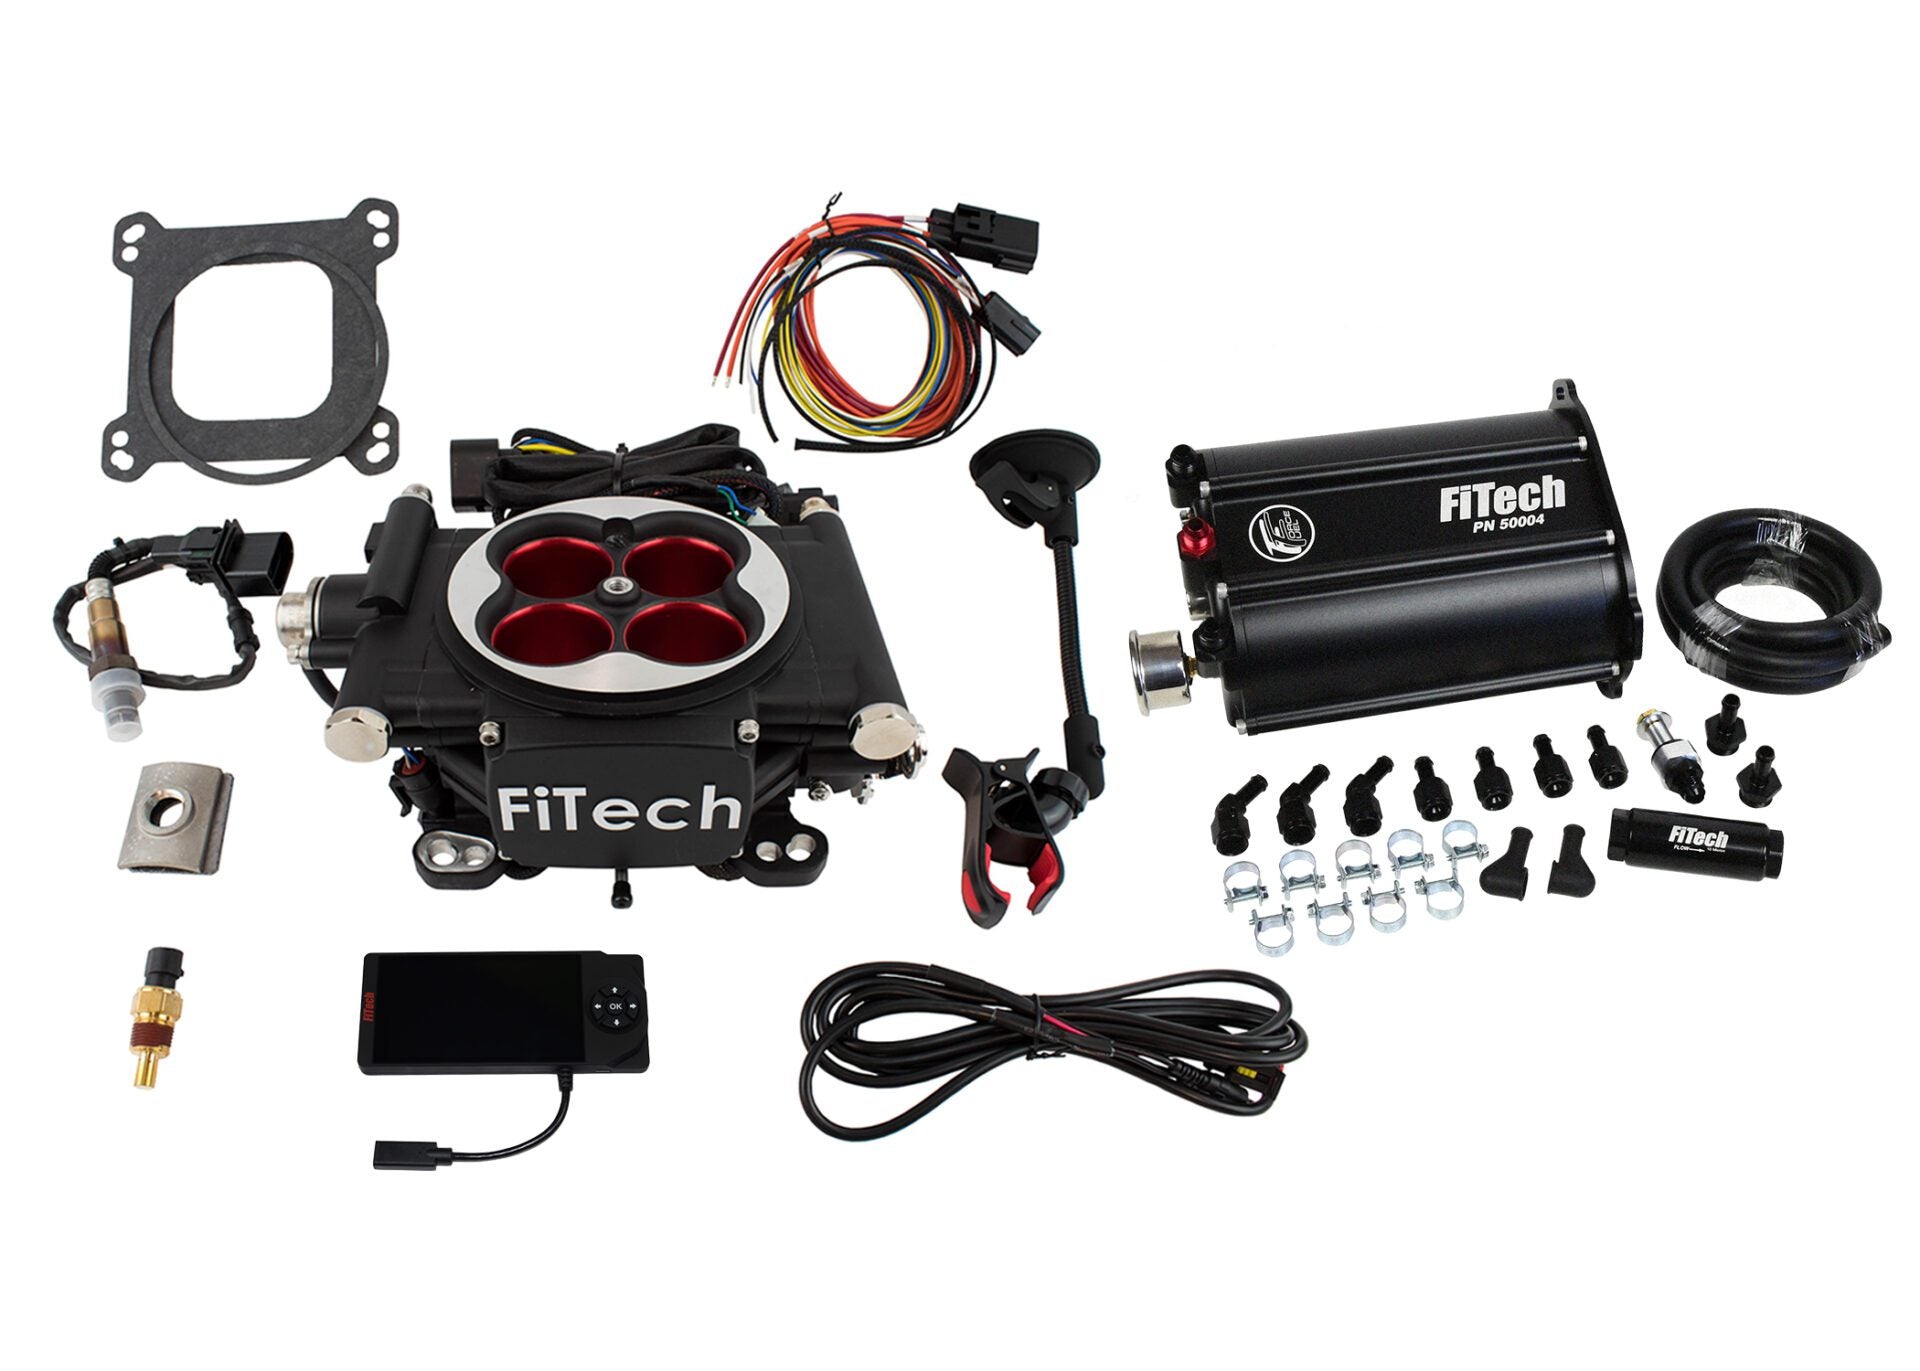 FiTech 35204 Go EFI 4 System (Power Adder) Master Kit w/ Force Fuel, Fuel Delivery System